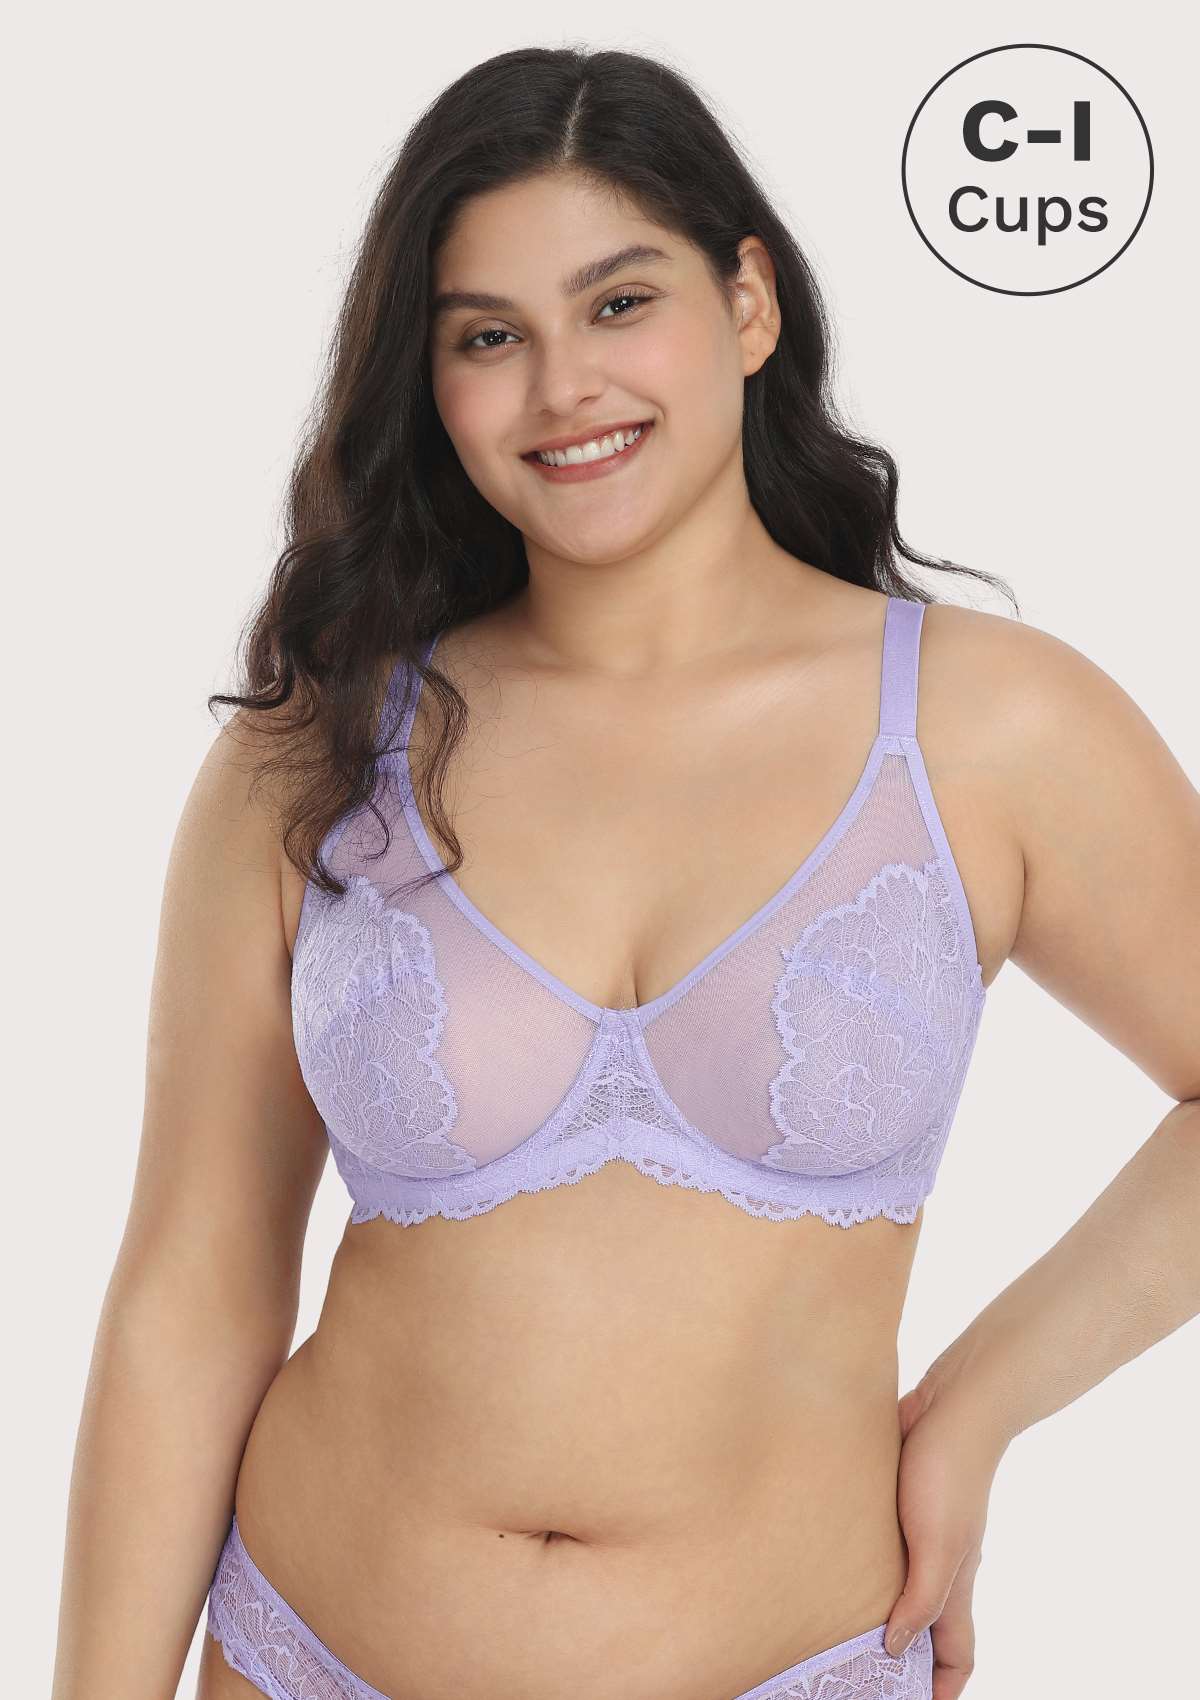 HSIA Blossom Transparent Lace Bra: Plus Size Wired Back Smoothing Bra - Light Purple / 38 / DD/E